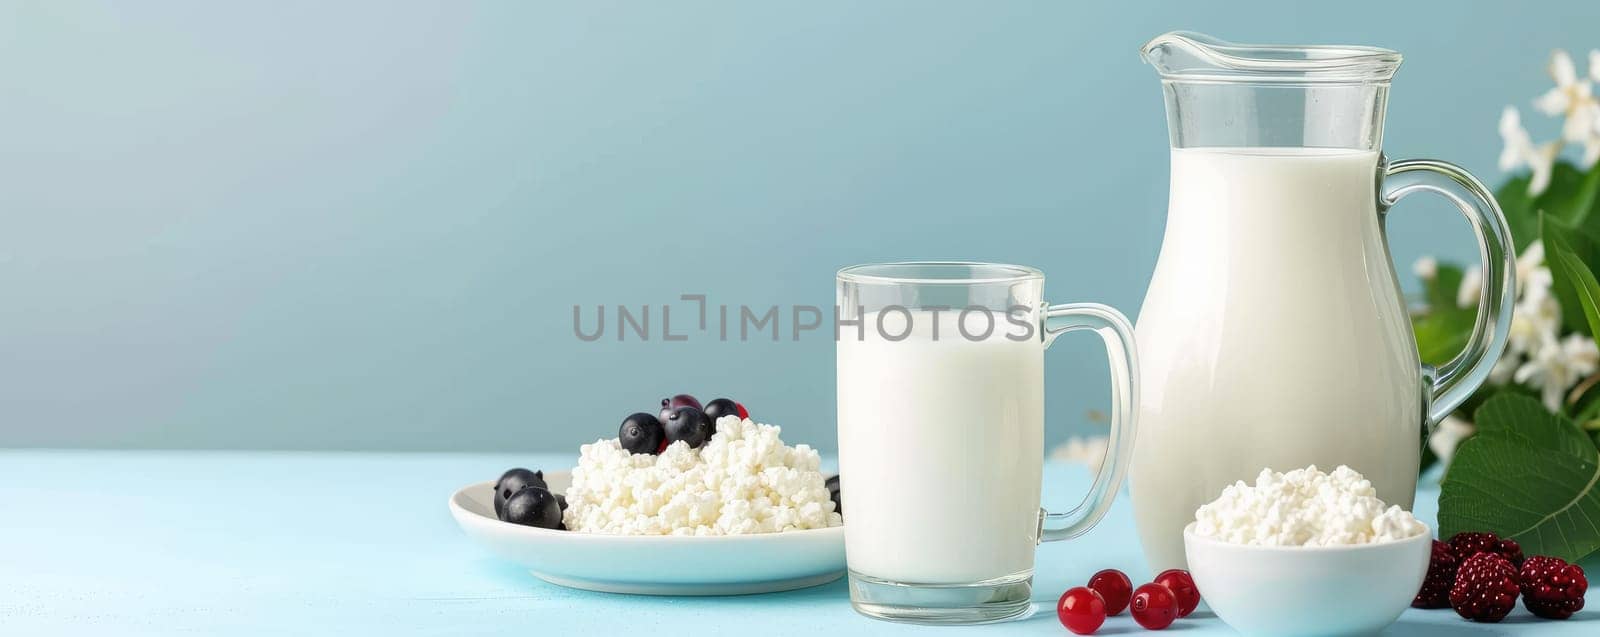 Juicy breakfast on a blue background with a jug of milk, cottage cheese and fresh berries